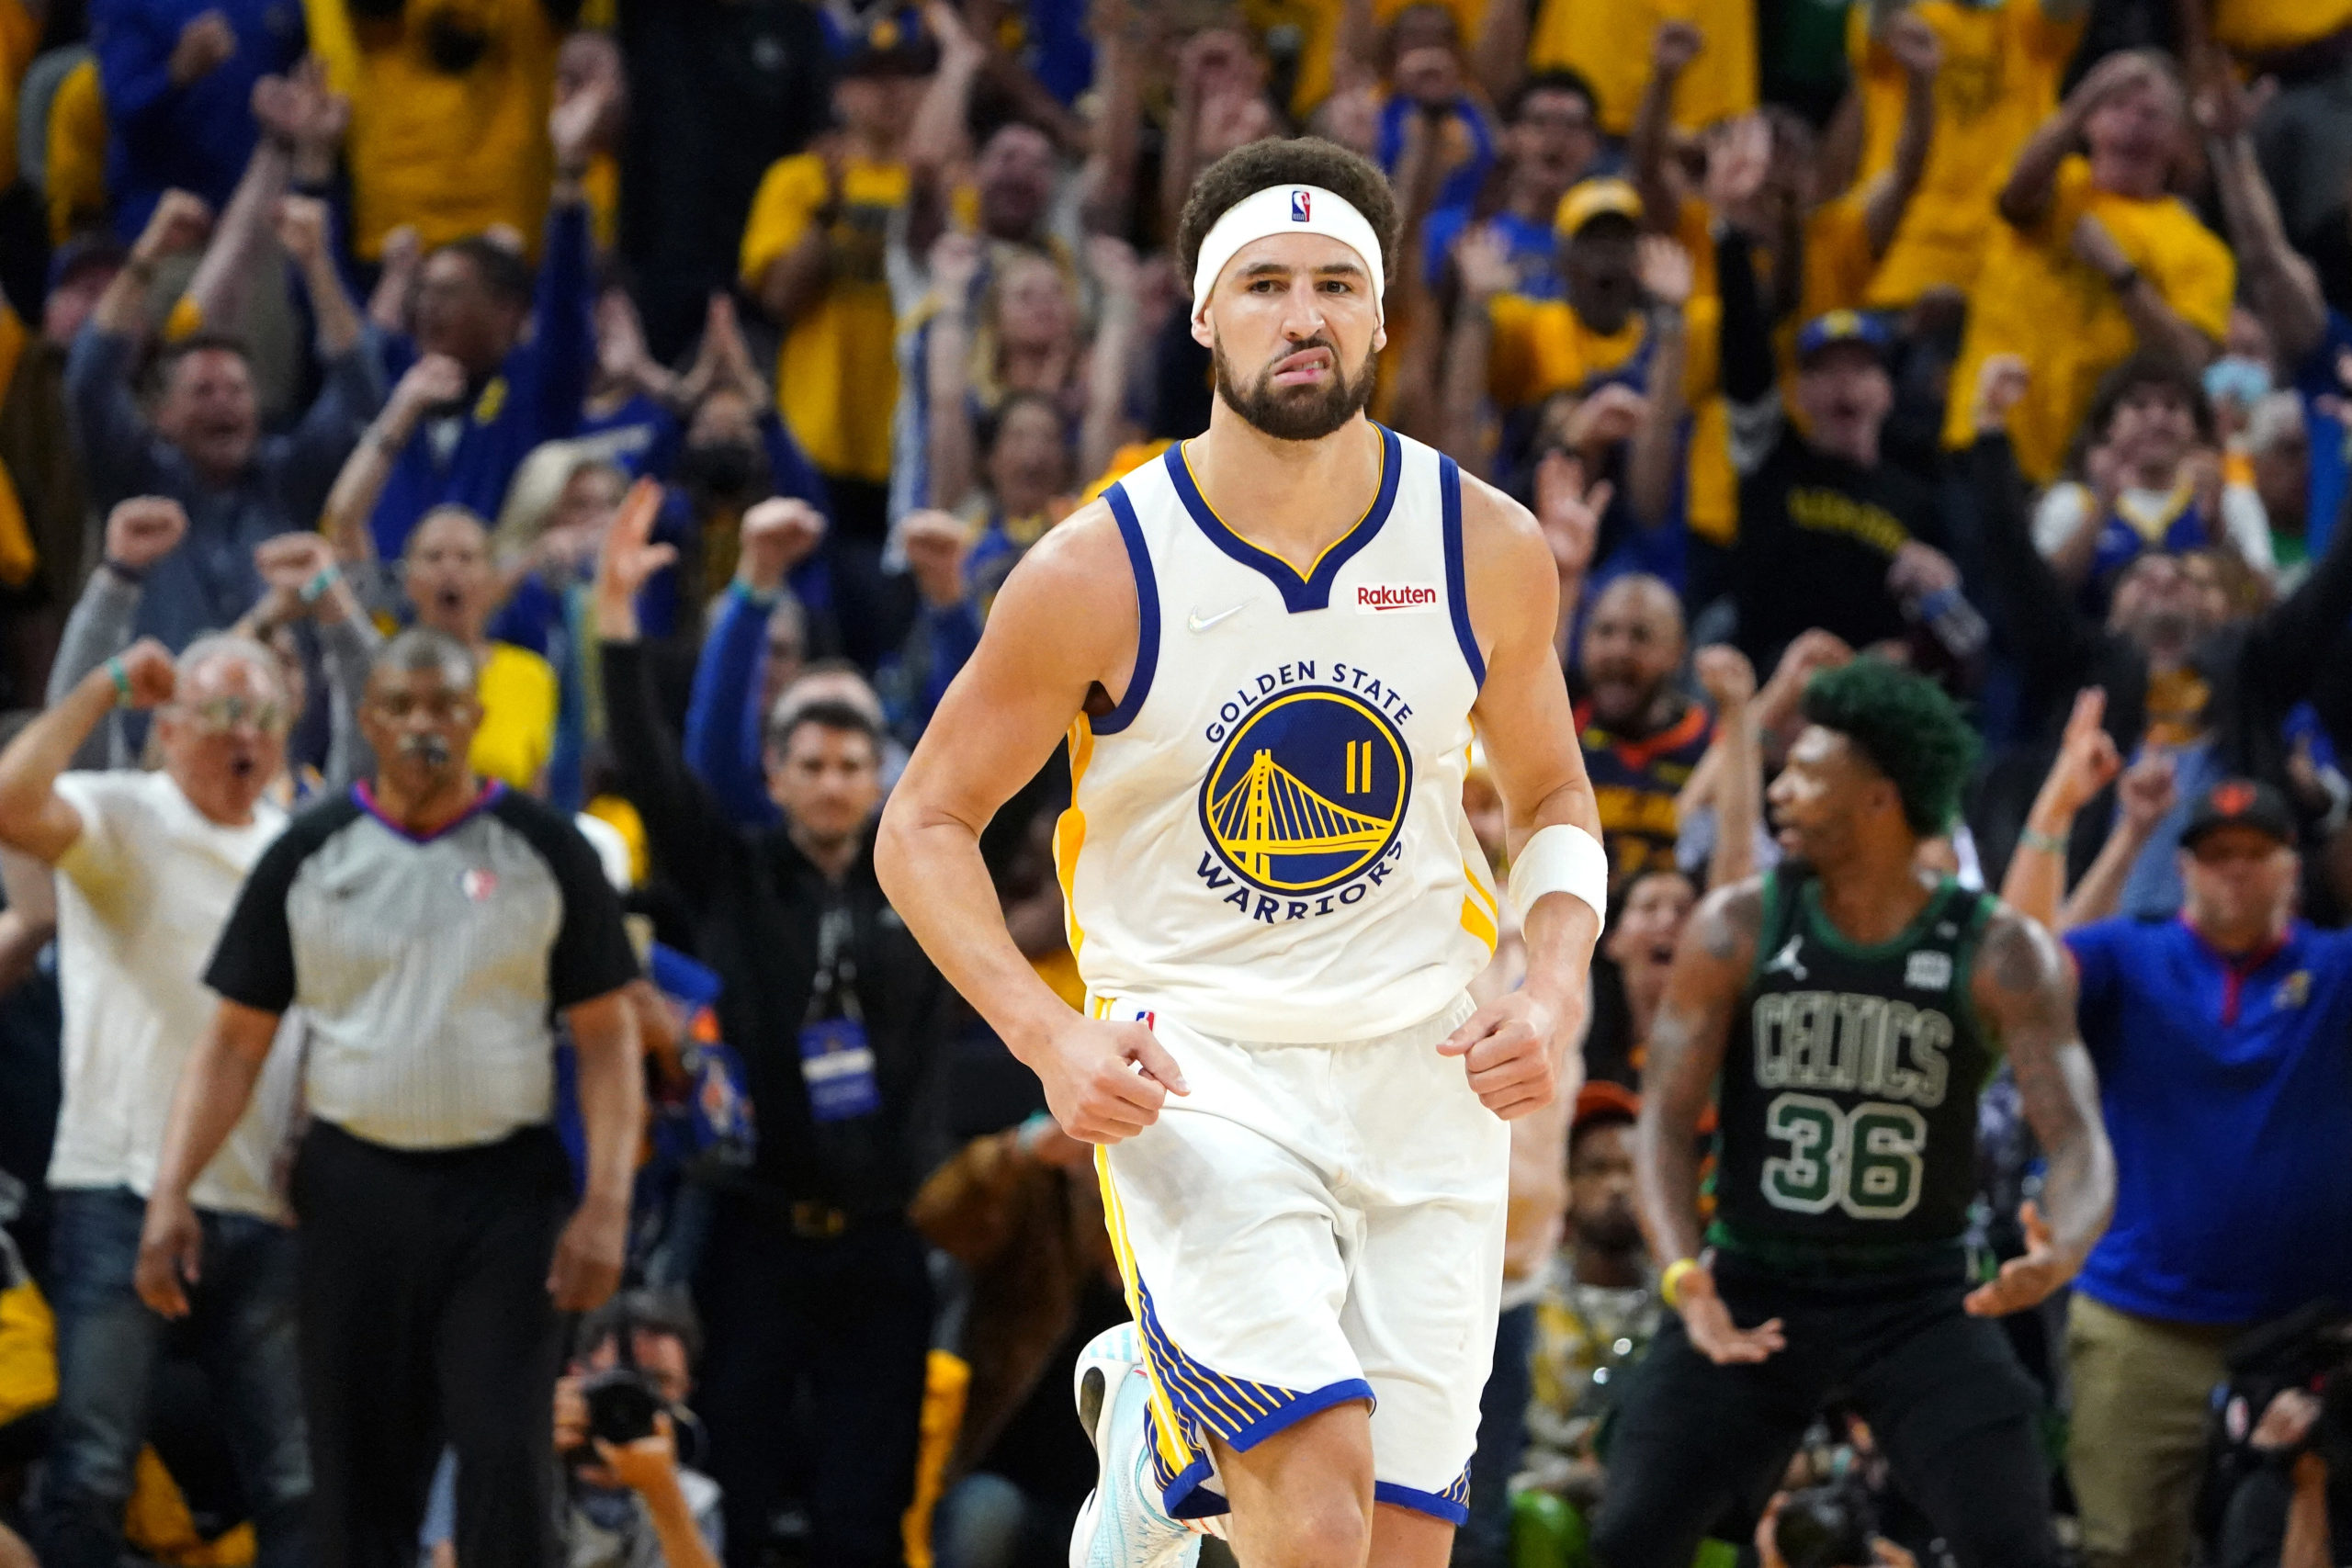 Jun 13, 2022; San Francisco, California, USA; Golden State Warriors guard Klay Thompson (11) reacts after making a three-point basket during the second half in game five of the 2022 NBA Finals against the Boston Celtics at Chase Center. Mandatory Credit: Kyle Terada-USA TODAY Sports